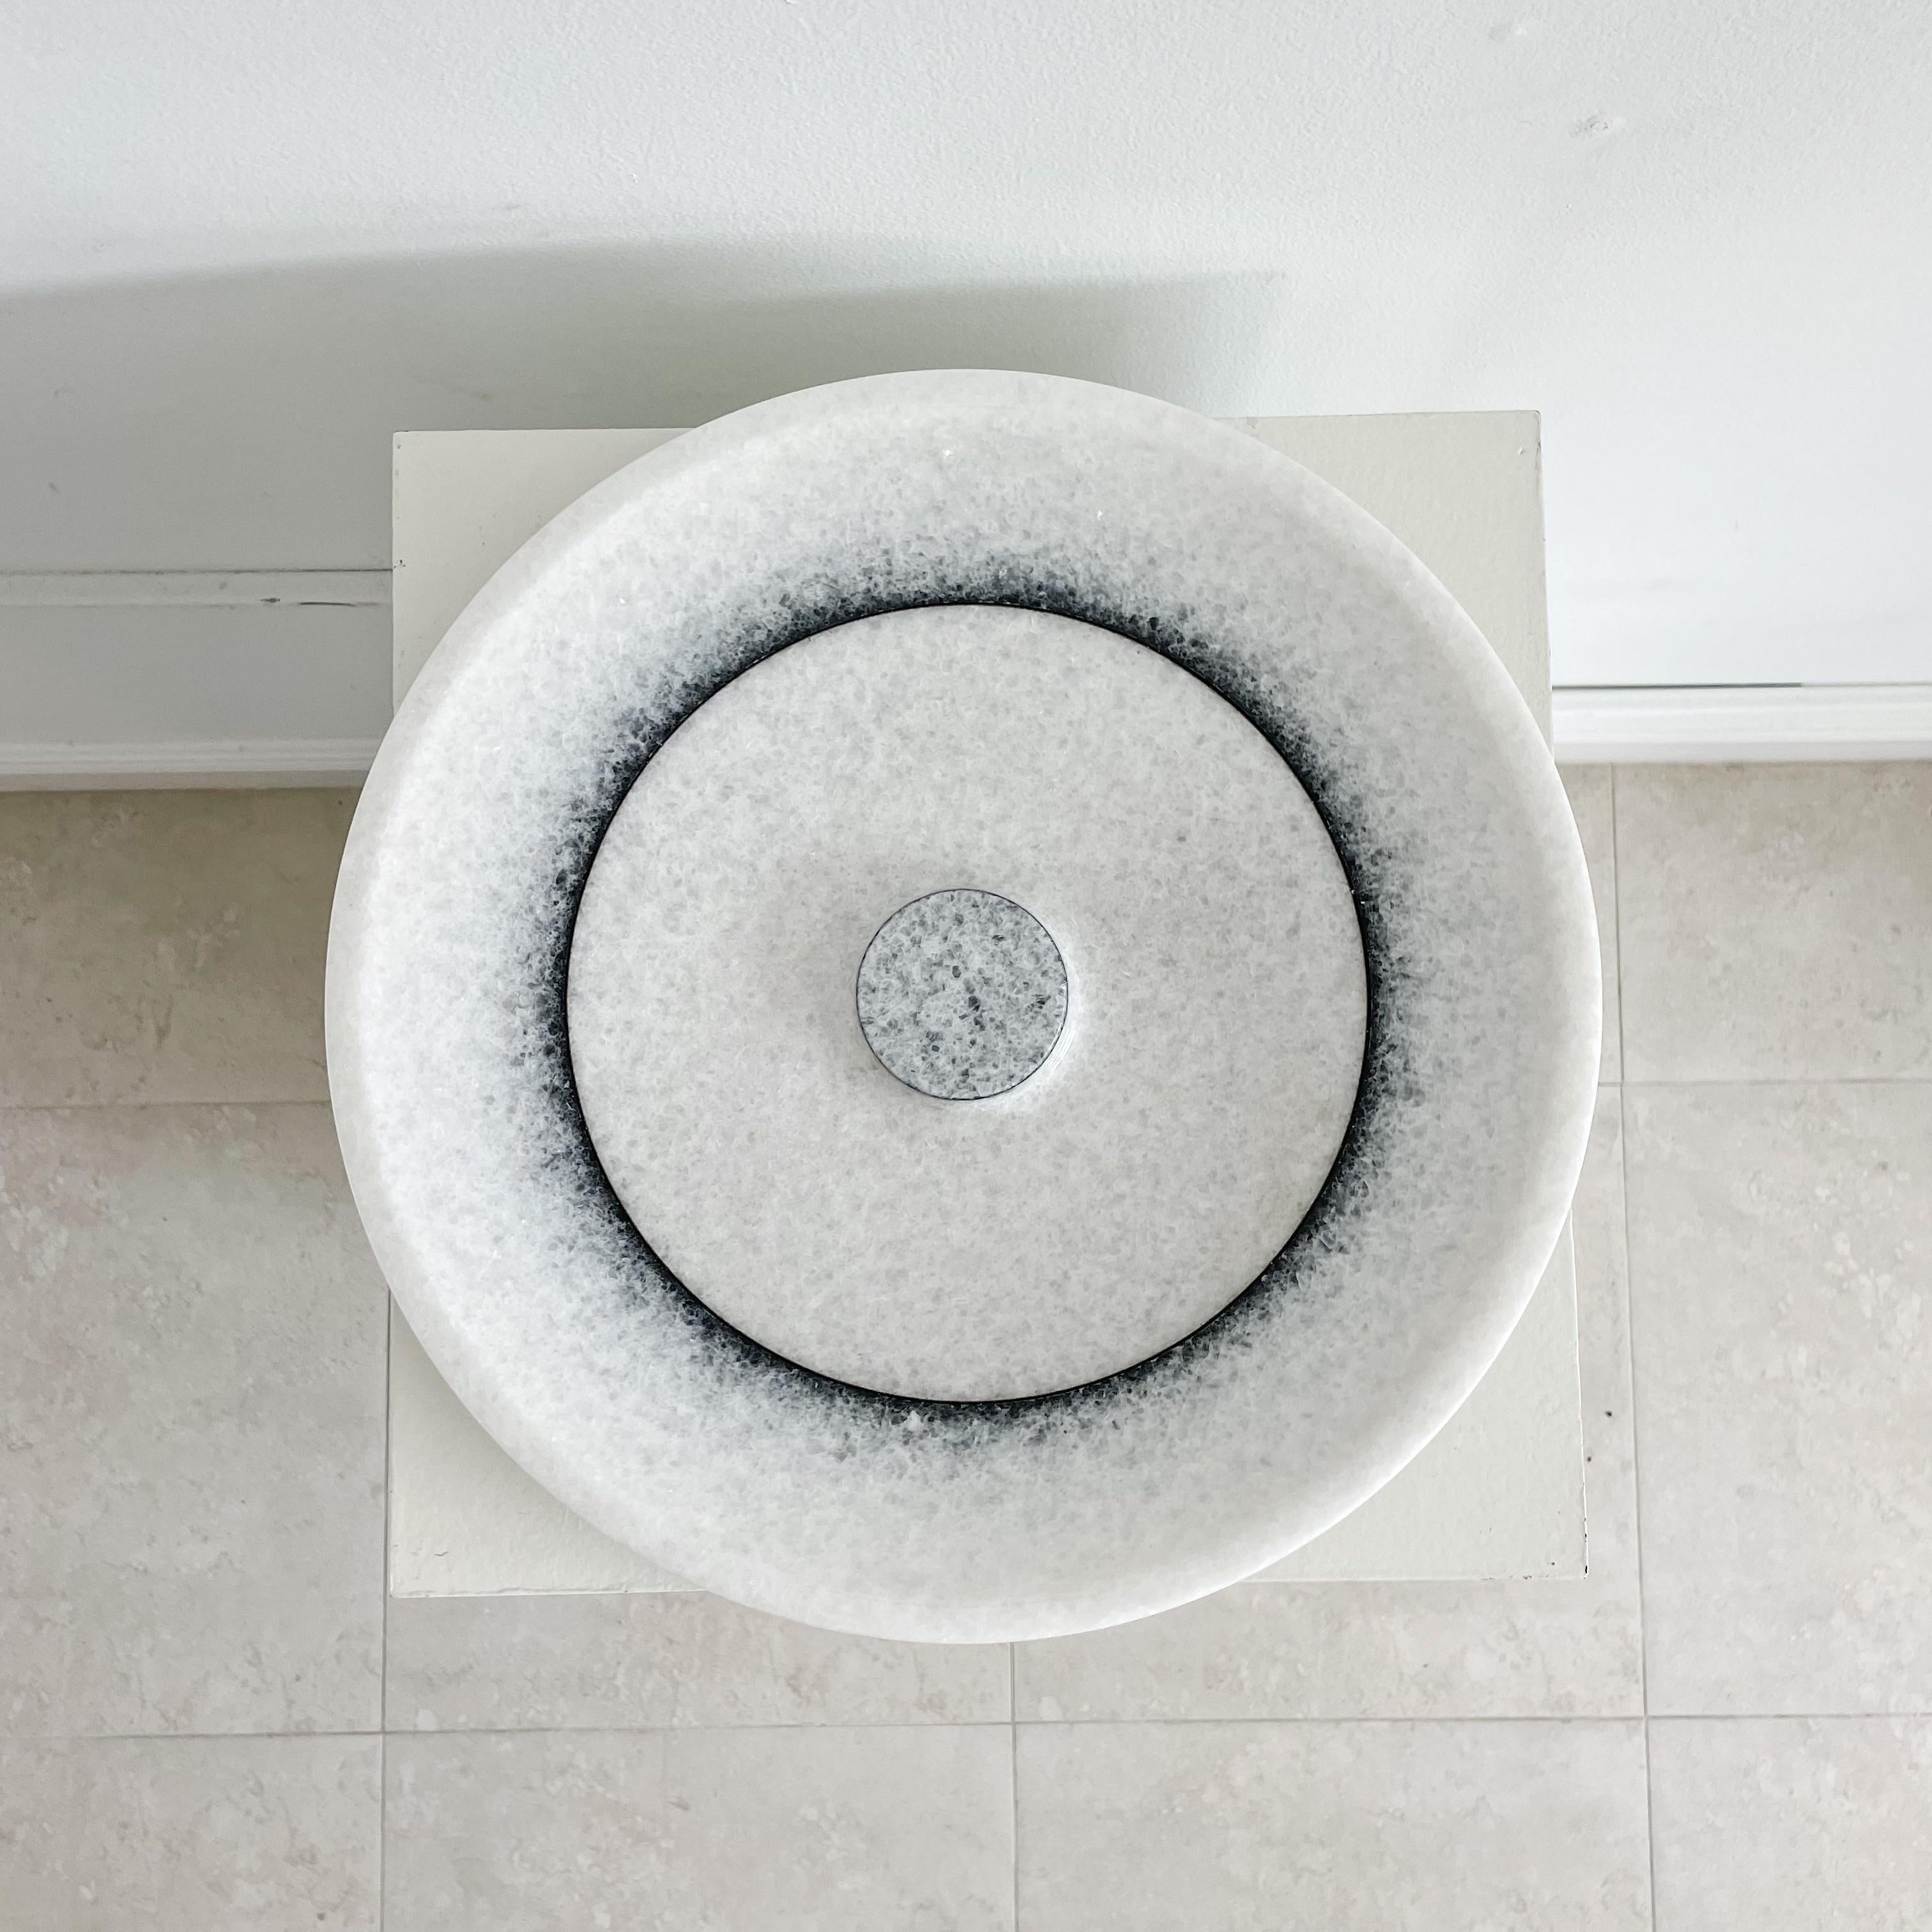 Modern white quartzite marble with black circular details centerpiece low bowl or charger plate by Giulio Lazzoti for Casigliani, with intact label on underside. Plate stand not included.